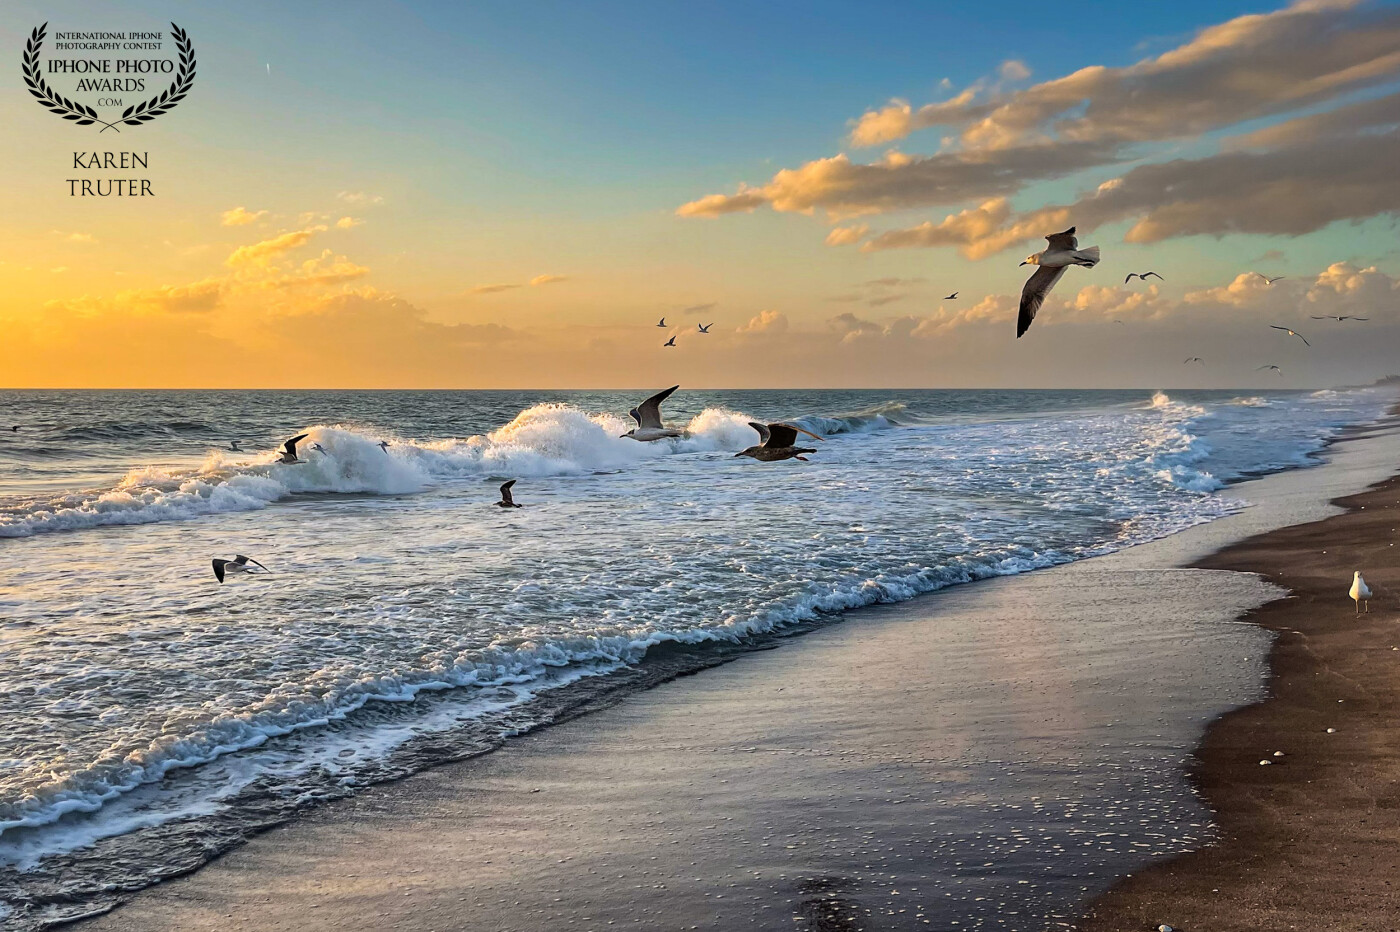 I call this photograph “Return to the Sea”. The seagulls were flying to the ocean during the last rays of light and I loved how the light reflects on the waves and the sand.